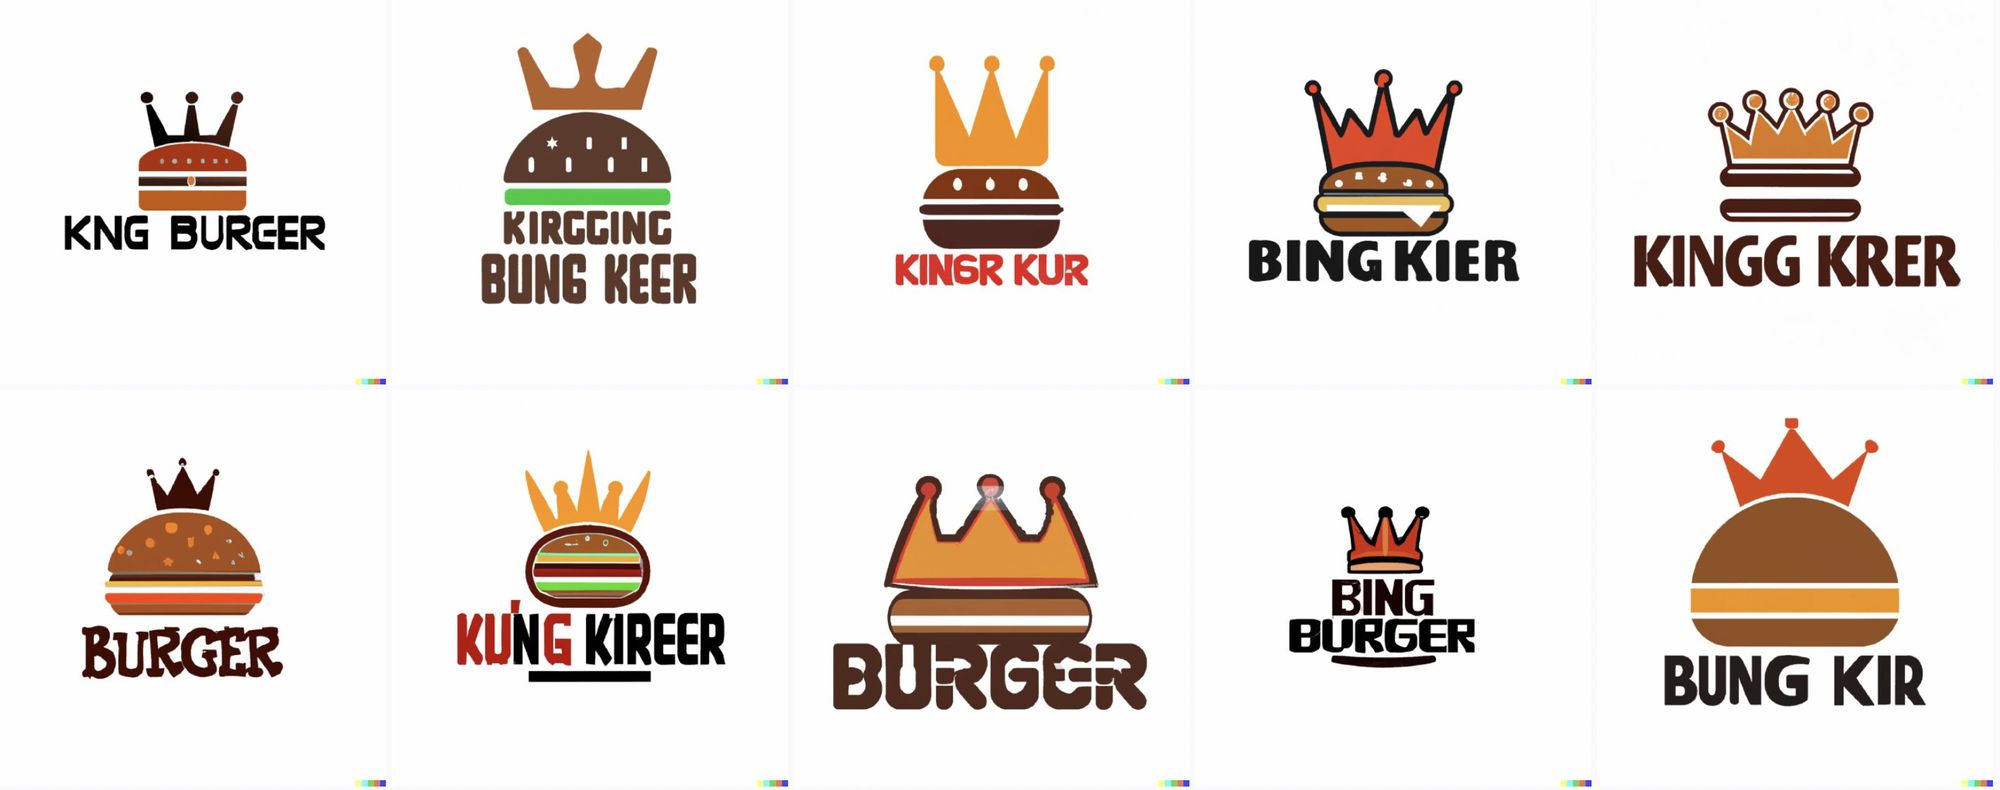 Logos that are burgers with crowns on them. The text reads variations on "Kirgging bung keer" and "bing burger" and "BURGER" and "Bung Kir"